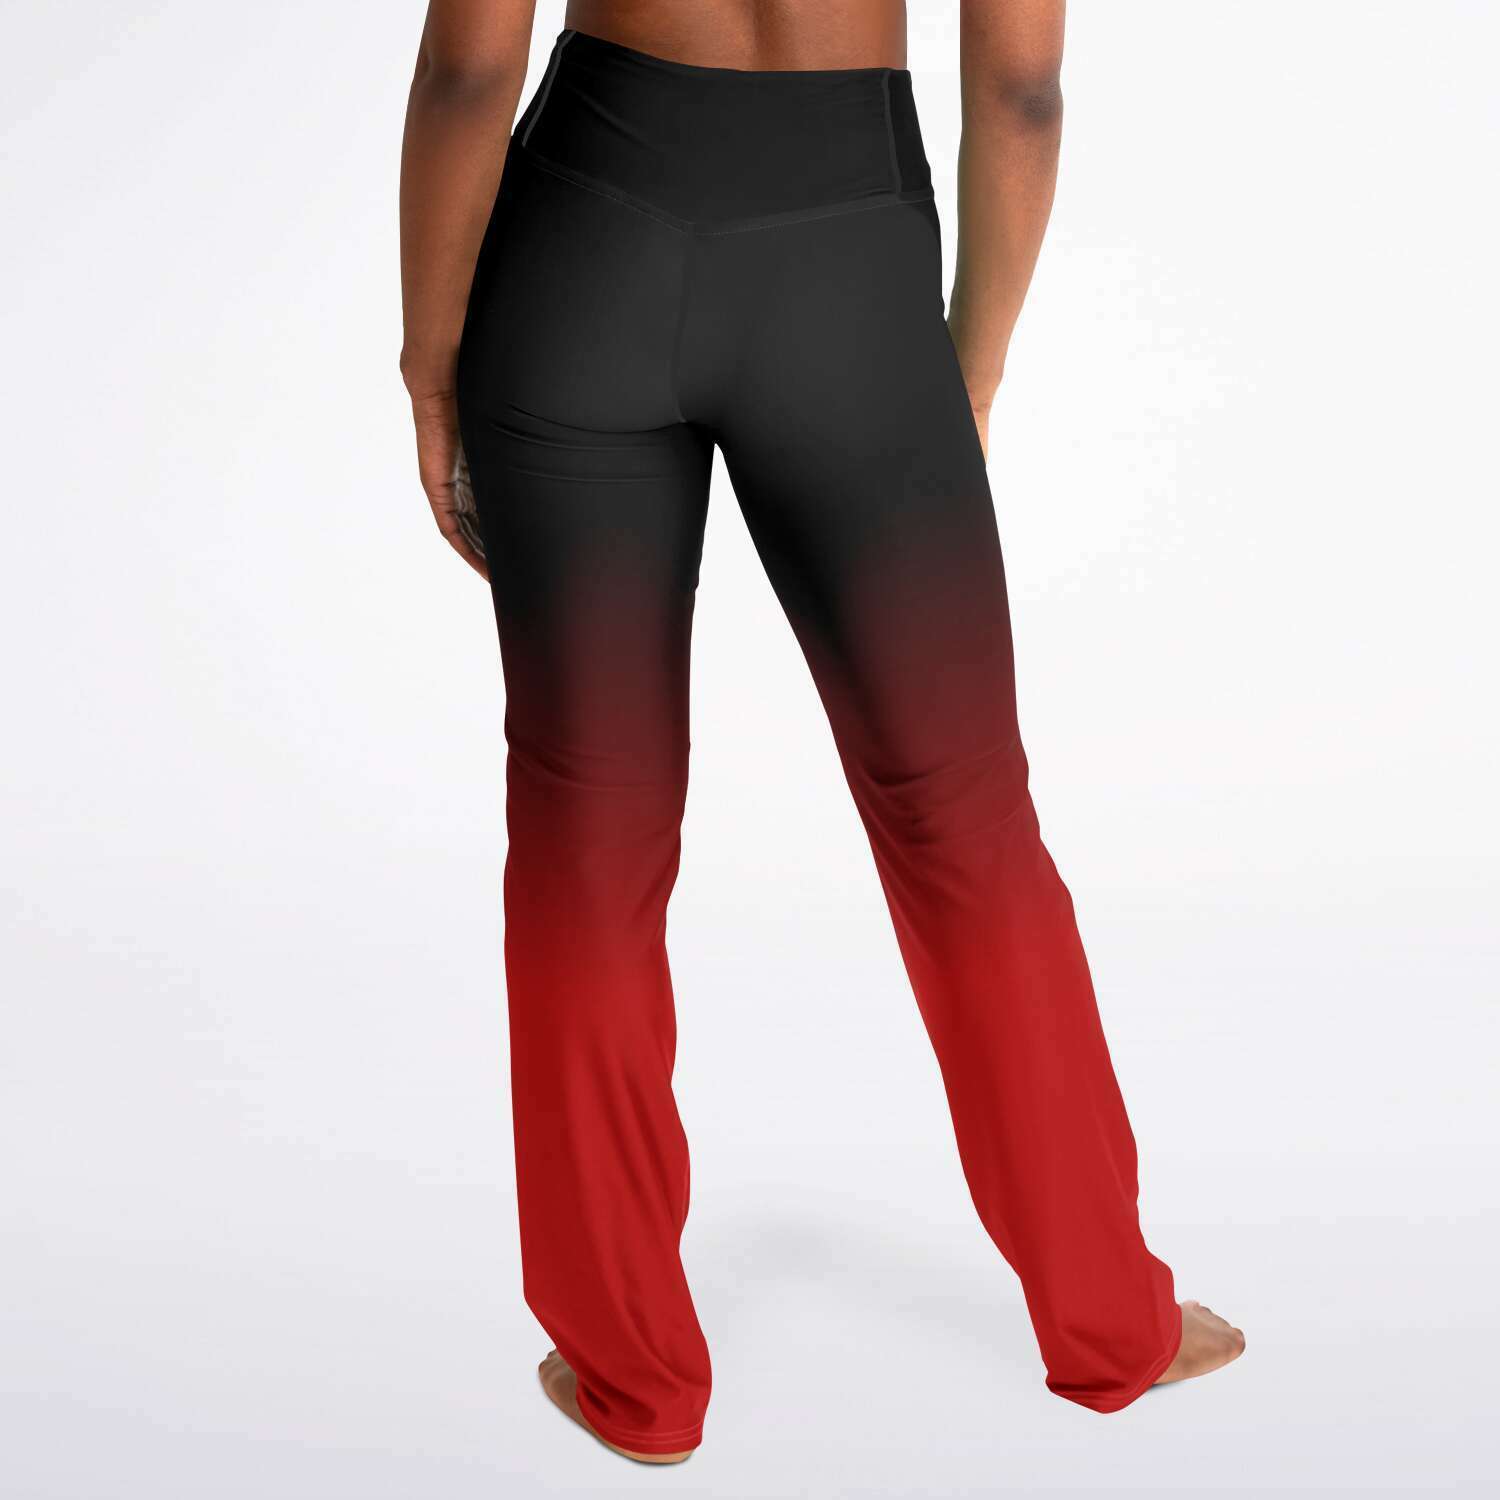 Black Red Ombre Flared Leggings, Tie Dye Printed High Waisted Yoga